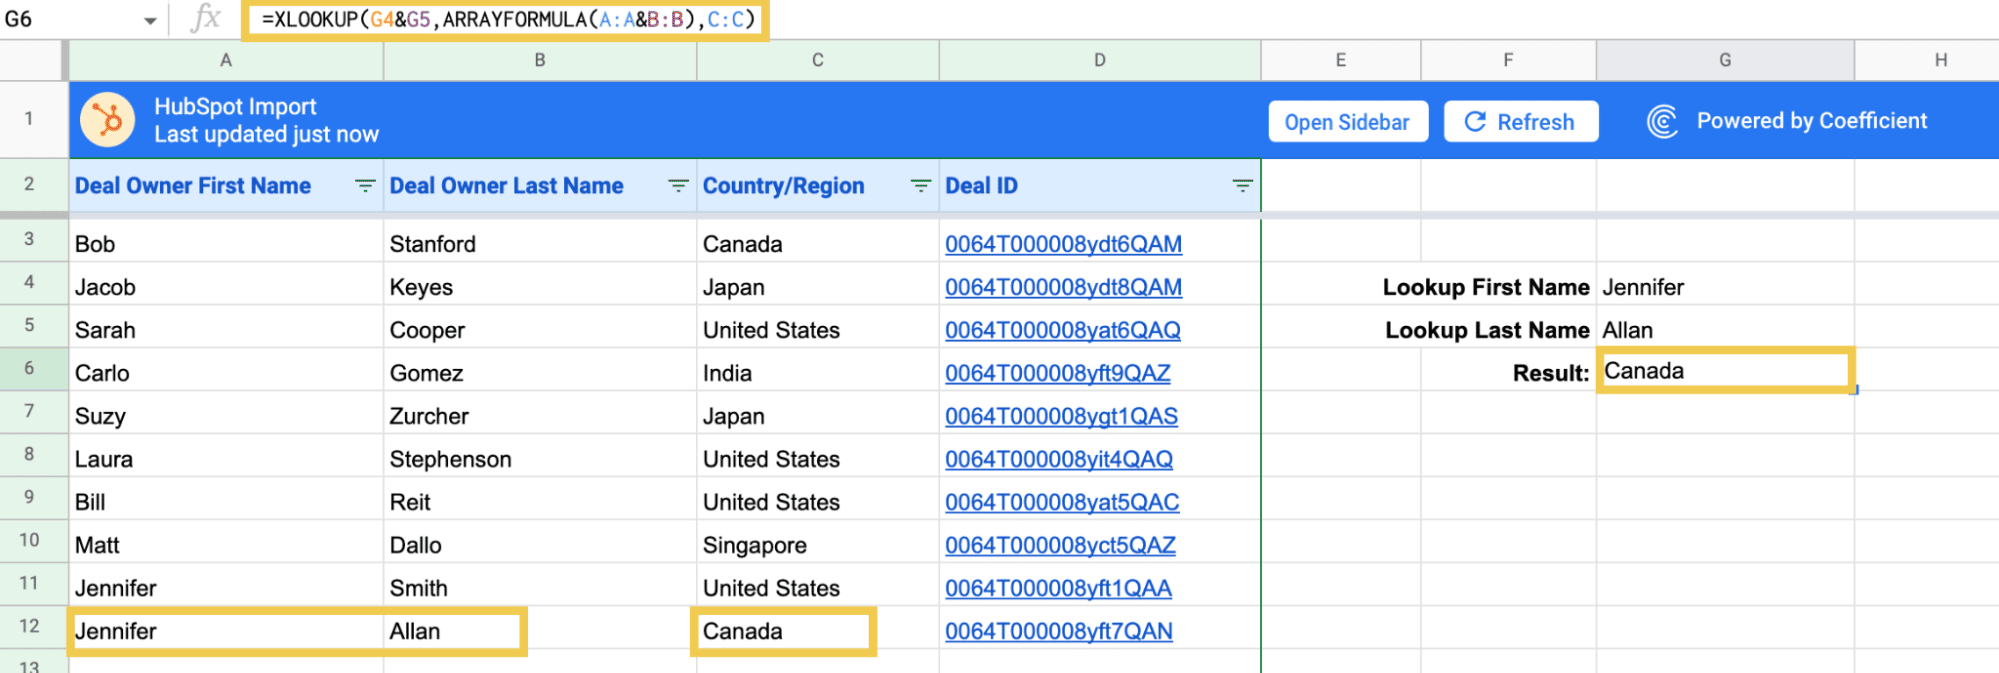 xlookup multiple conditions